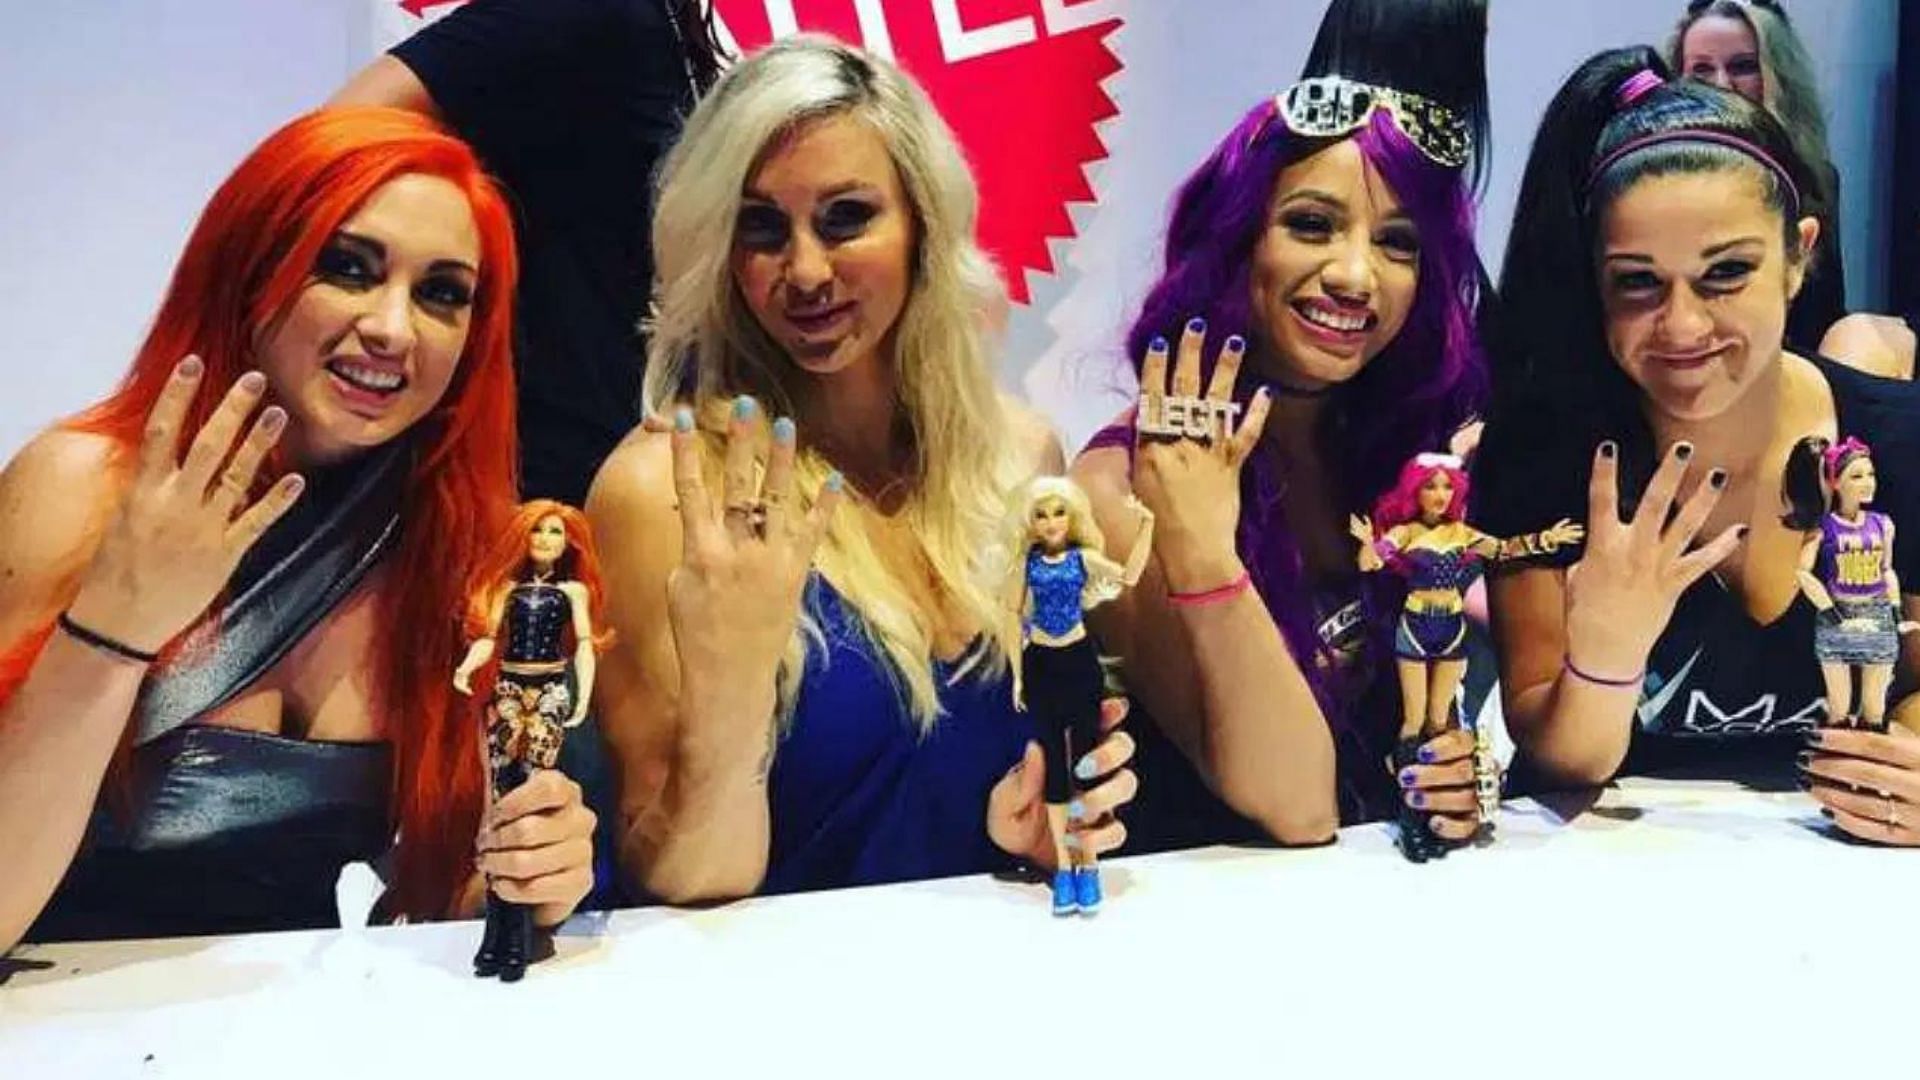 Becky Lynch, Charlotte Flair, Mercedes Mone, and Bayley